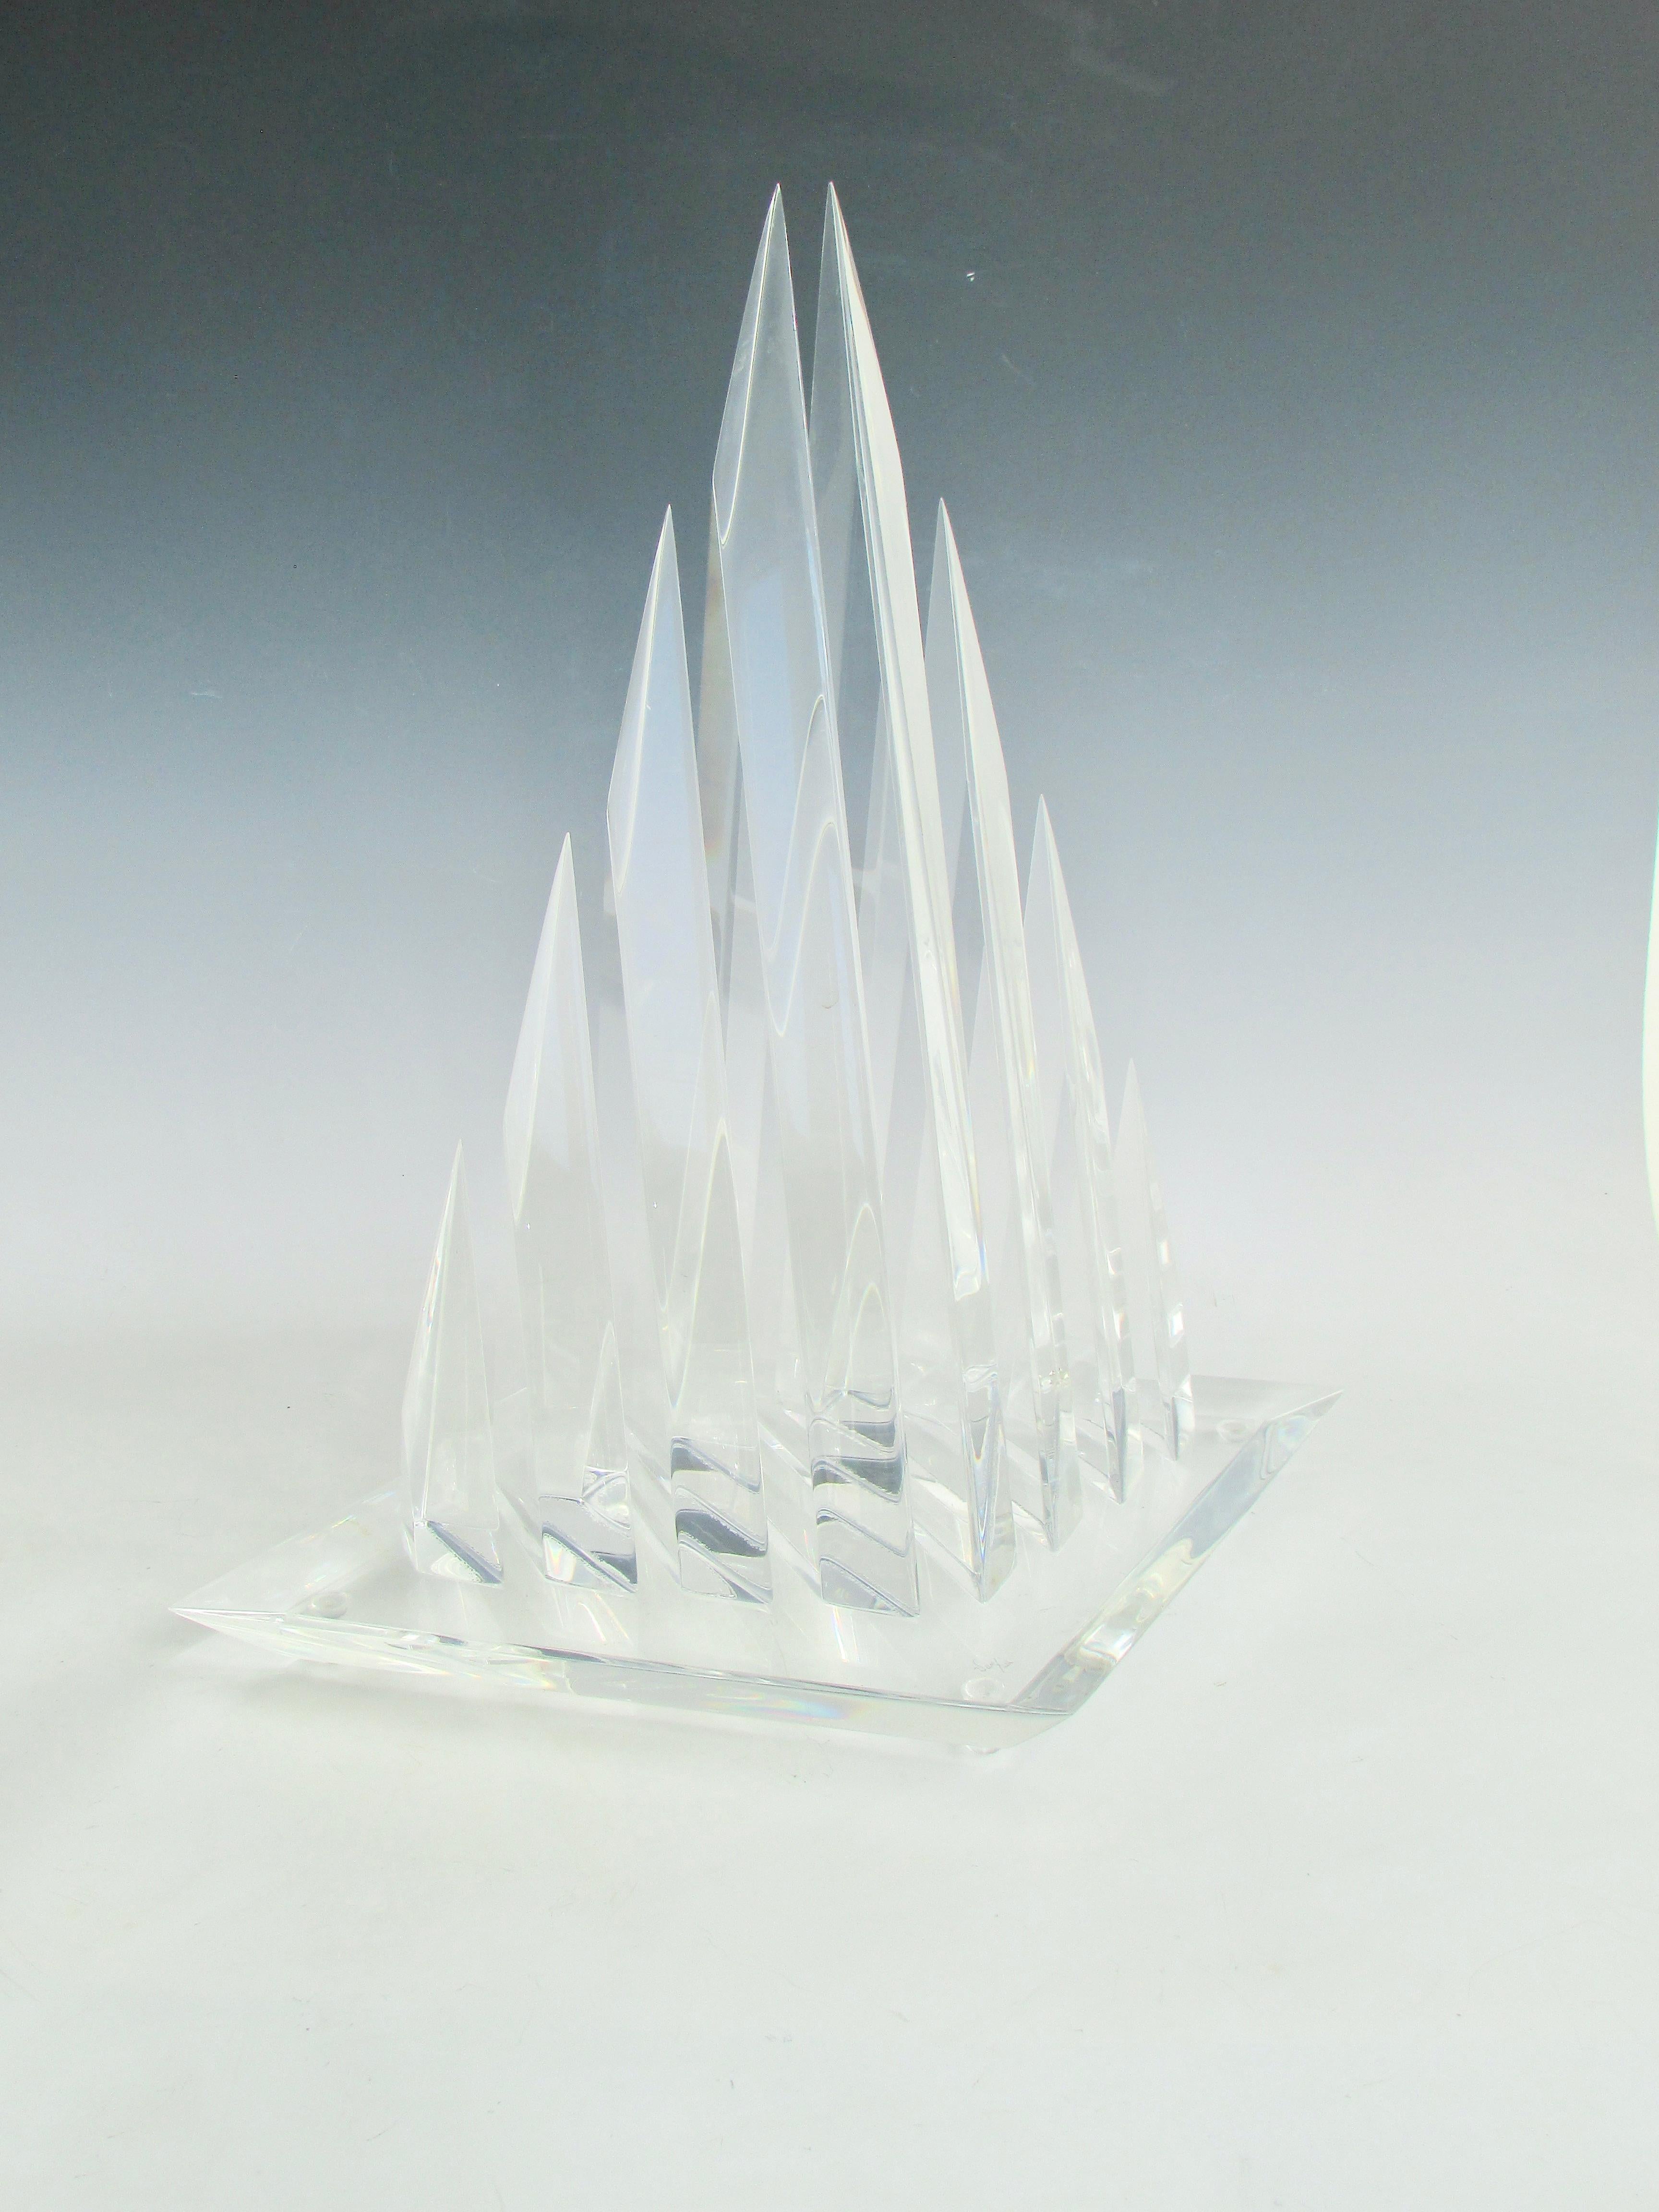 Polished Hivo Van Teal Segmented Lucite Pyramid, Triangle Sculpture For Sale